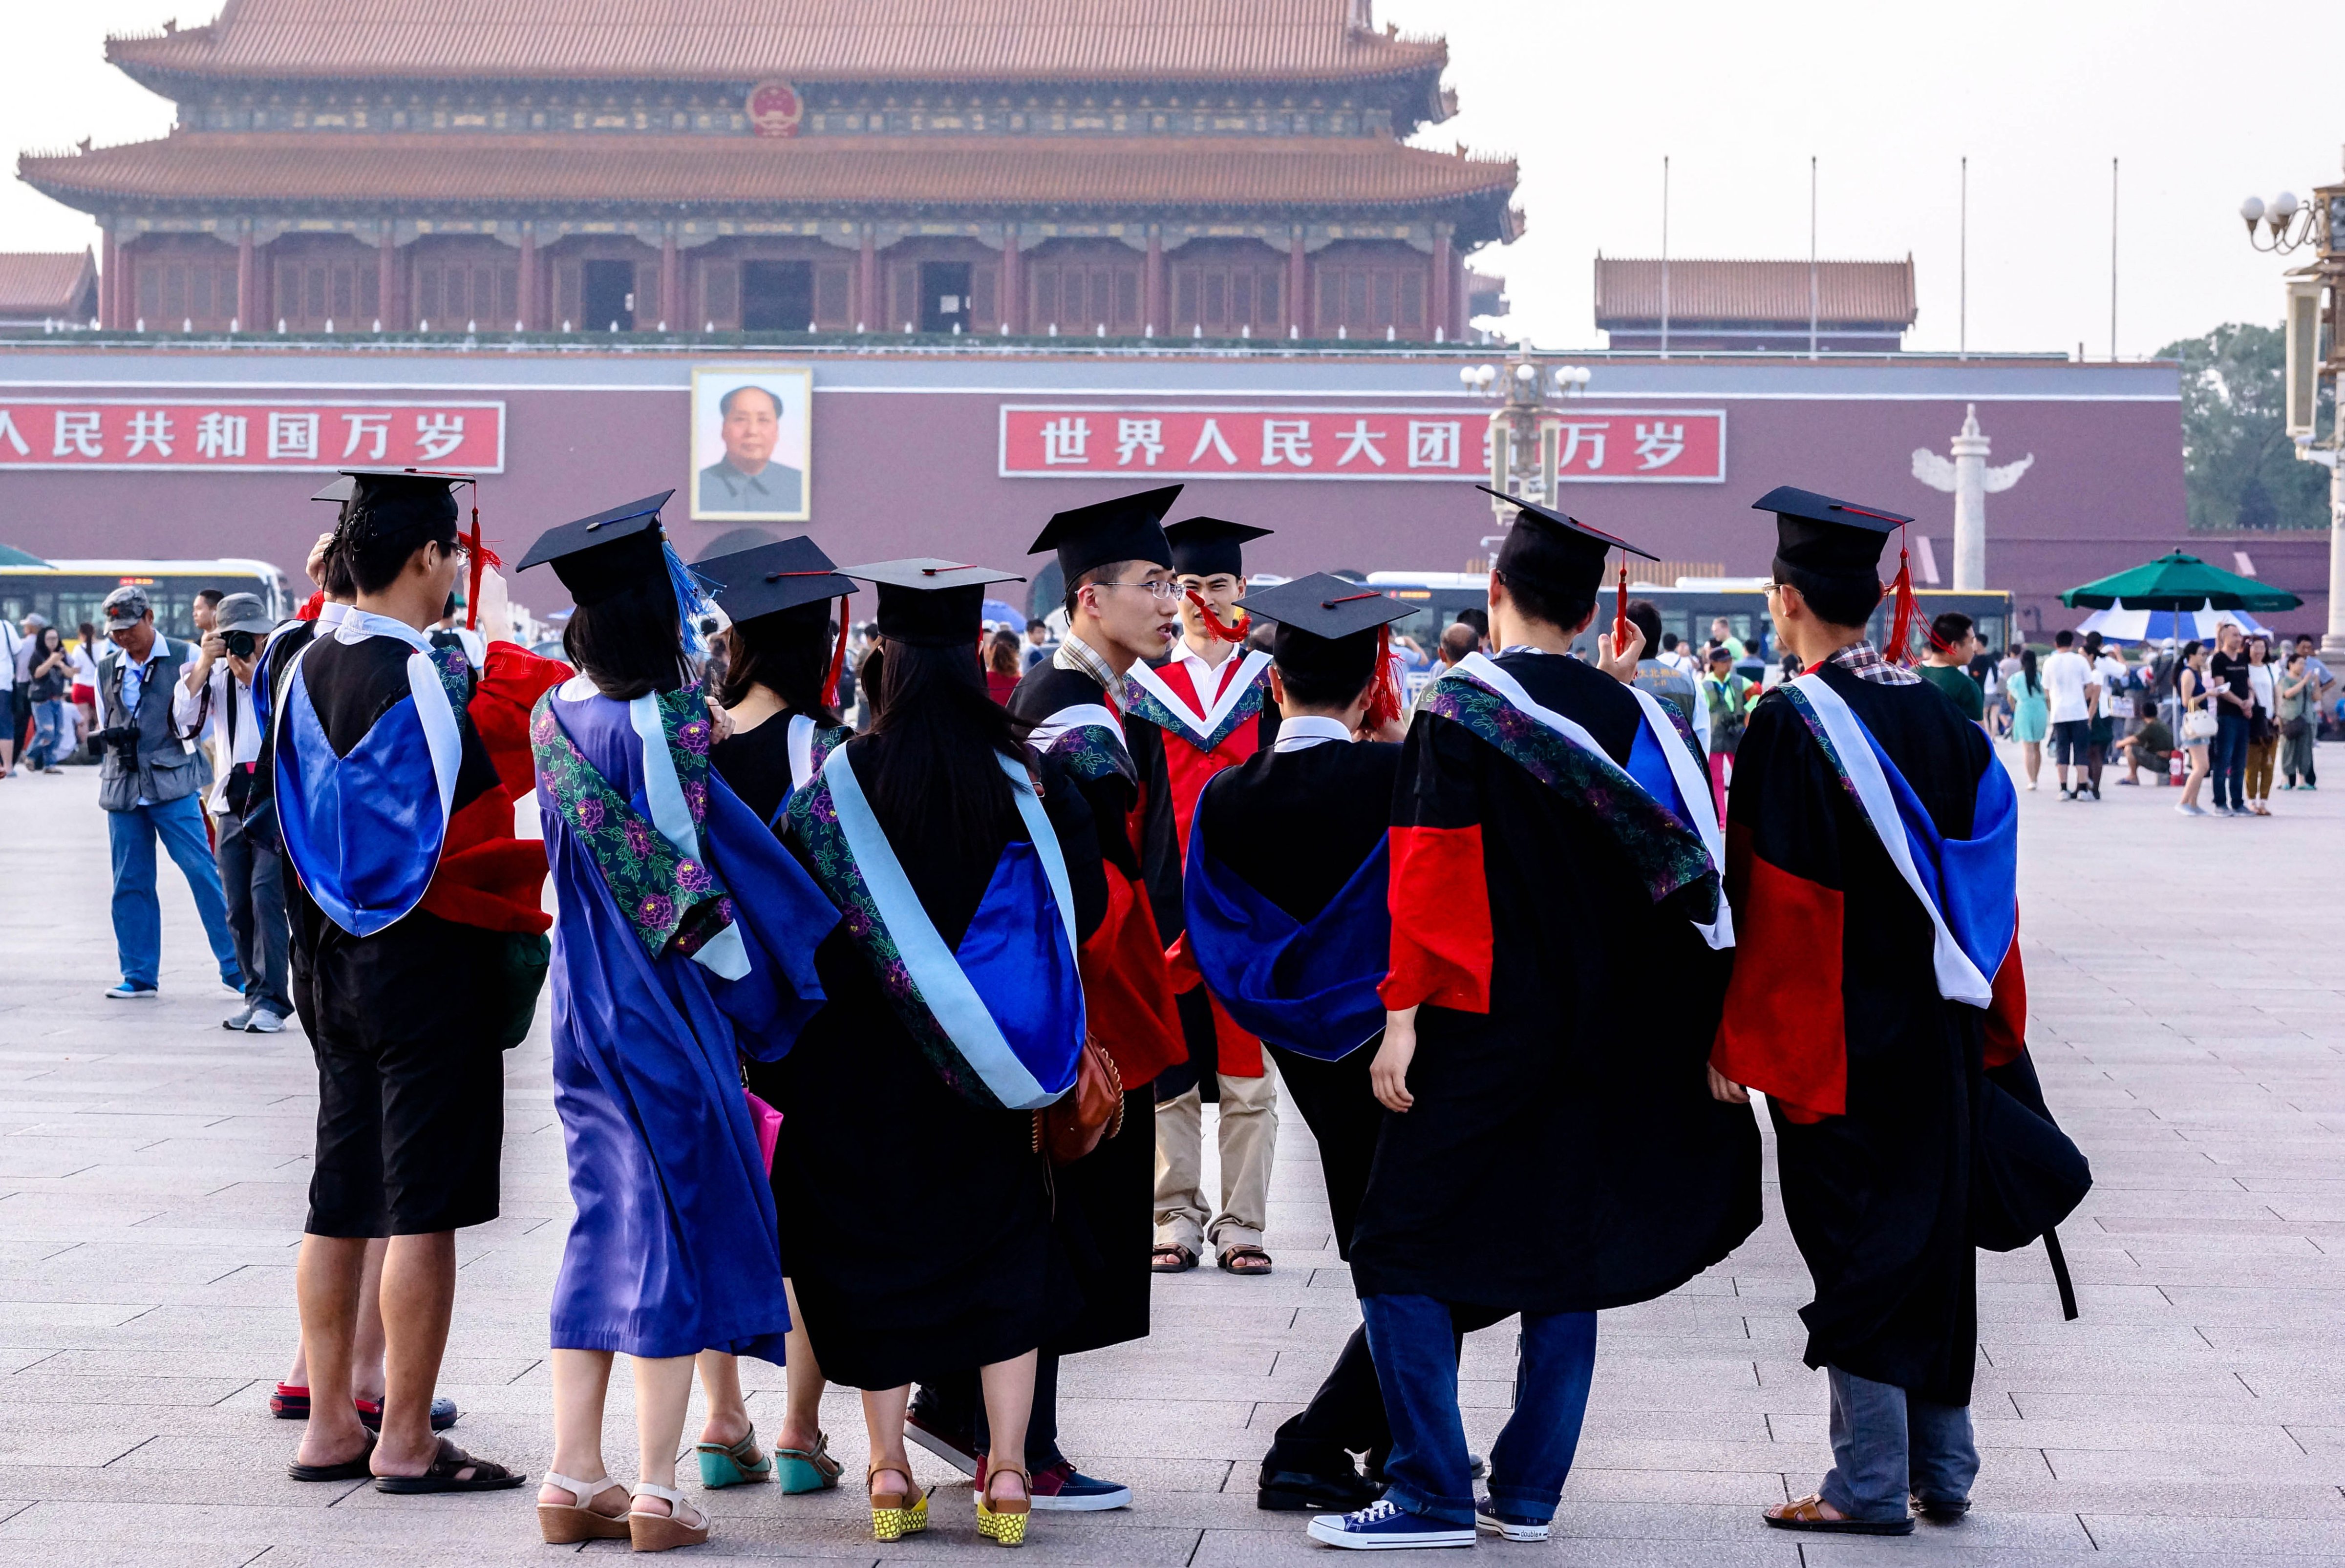 Graduates from Peking Union Medical College take commemorative photos in Tienanmen Square, Beijing, China, June 19, 2014 (Zhang Peng—LightRocket/Getty Images)